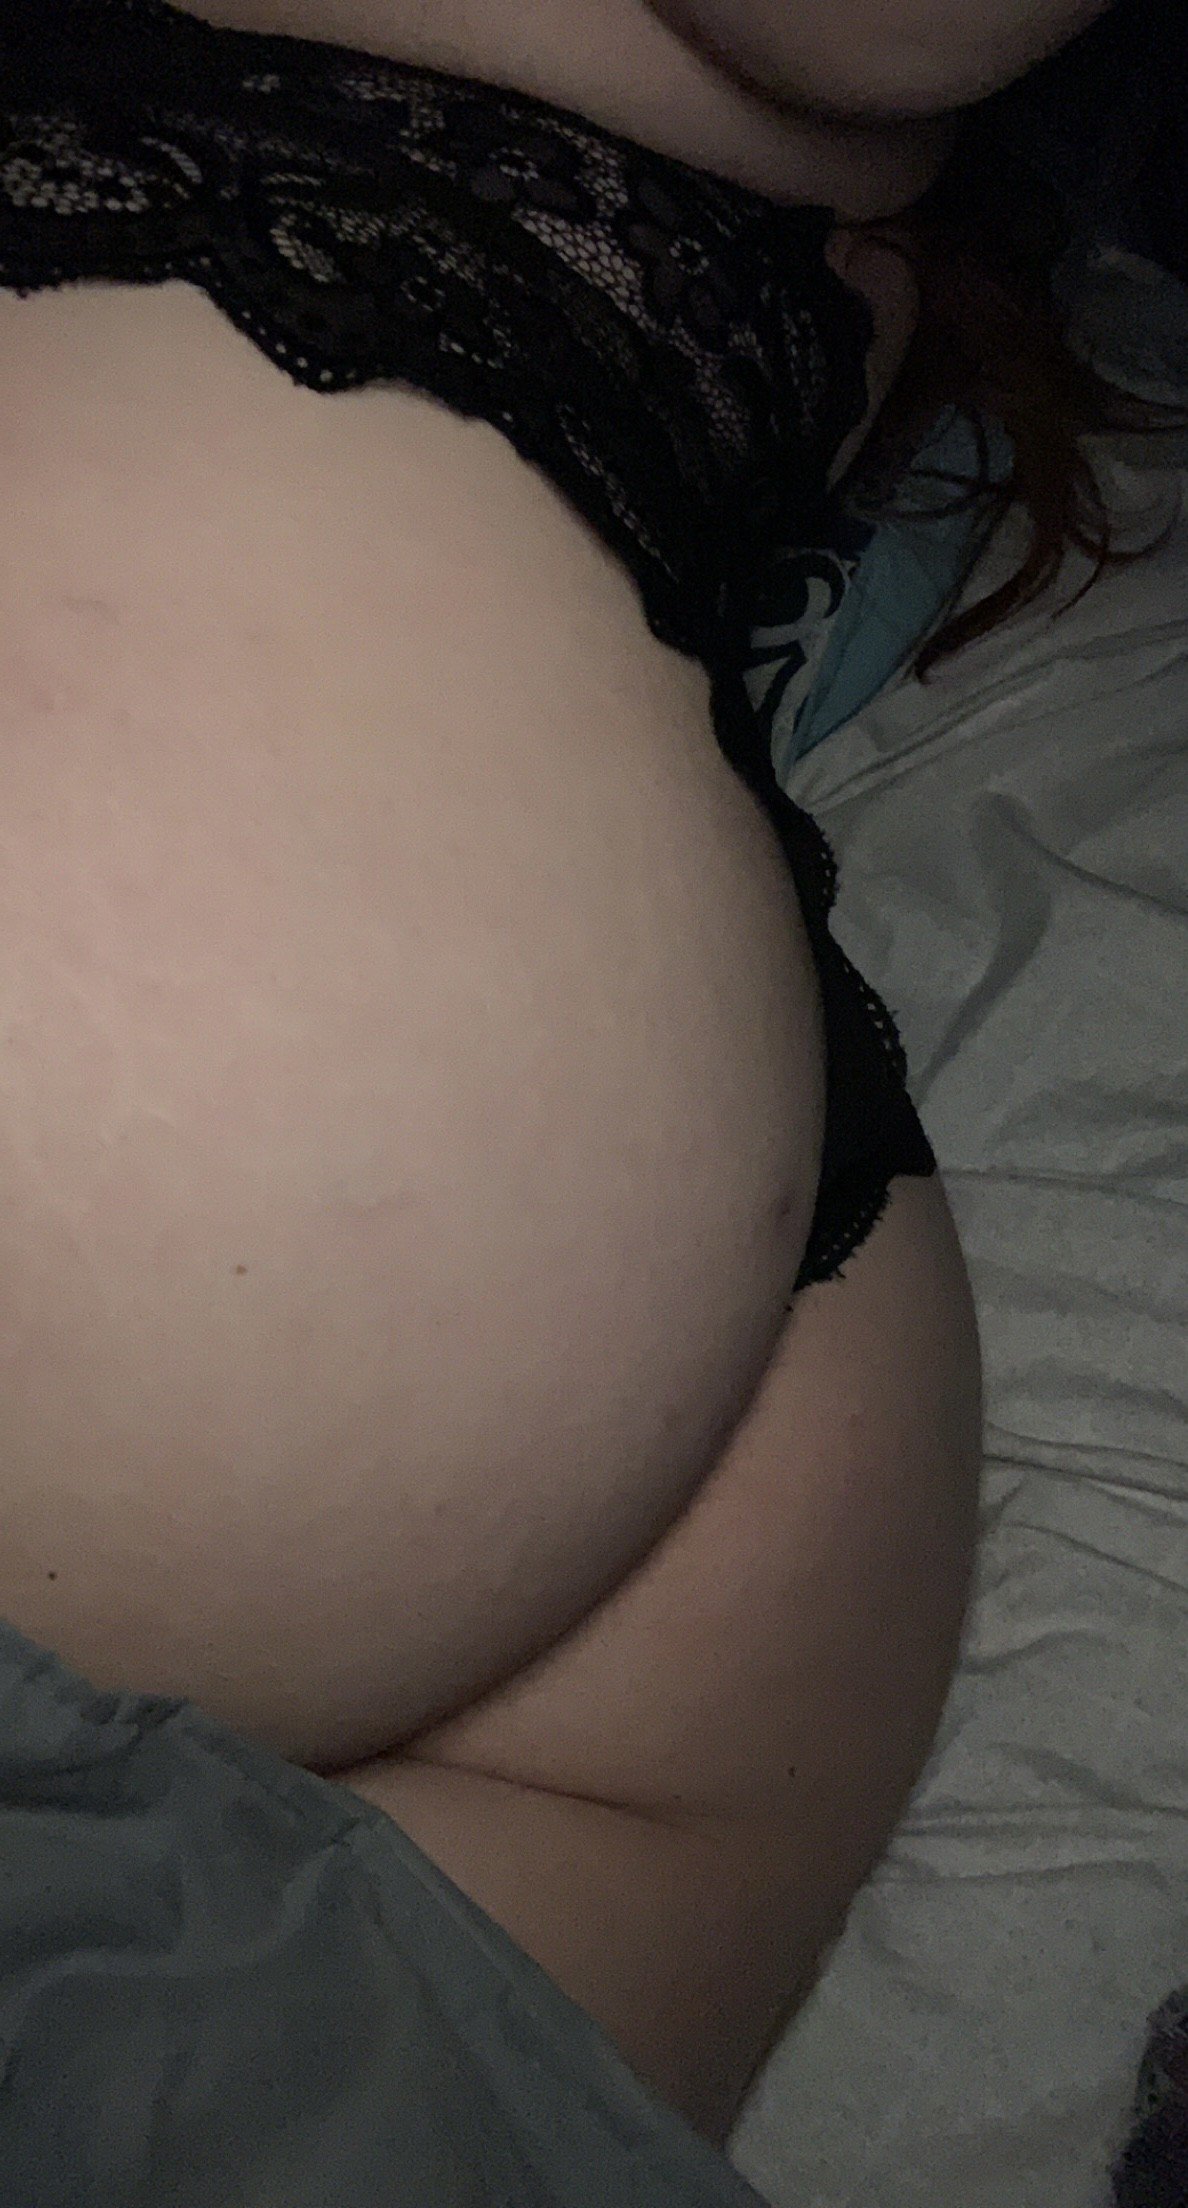 Photo by Kait2138 with the username @Kait2138, who is a star user,  January 13, 2021 at 3:00 PM. The post is about the topic OnlyFans and the text says 'No pay walls!!! onlyfans.com/thicckait

#onlyfans #onlyfansbbw #of #onlyfanspromo #onlyfanspromotion #sellingcontent #bbw #chubby #kinky'